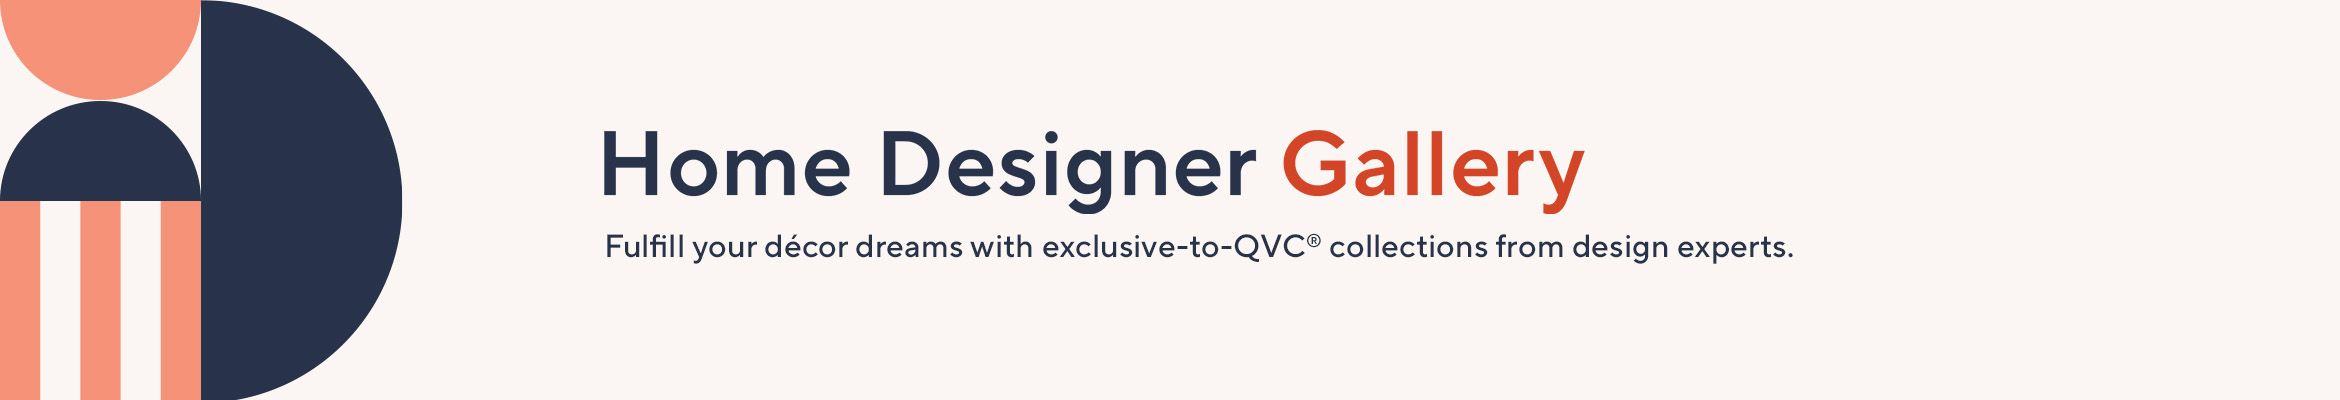 Home Designer Gallery Fulfill your décor dreams with exclusive-to-QVC® collections from design experts. 